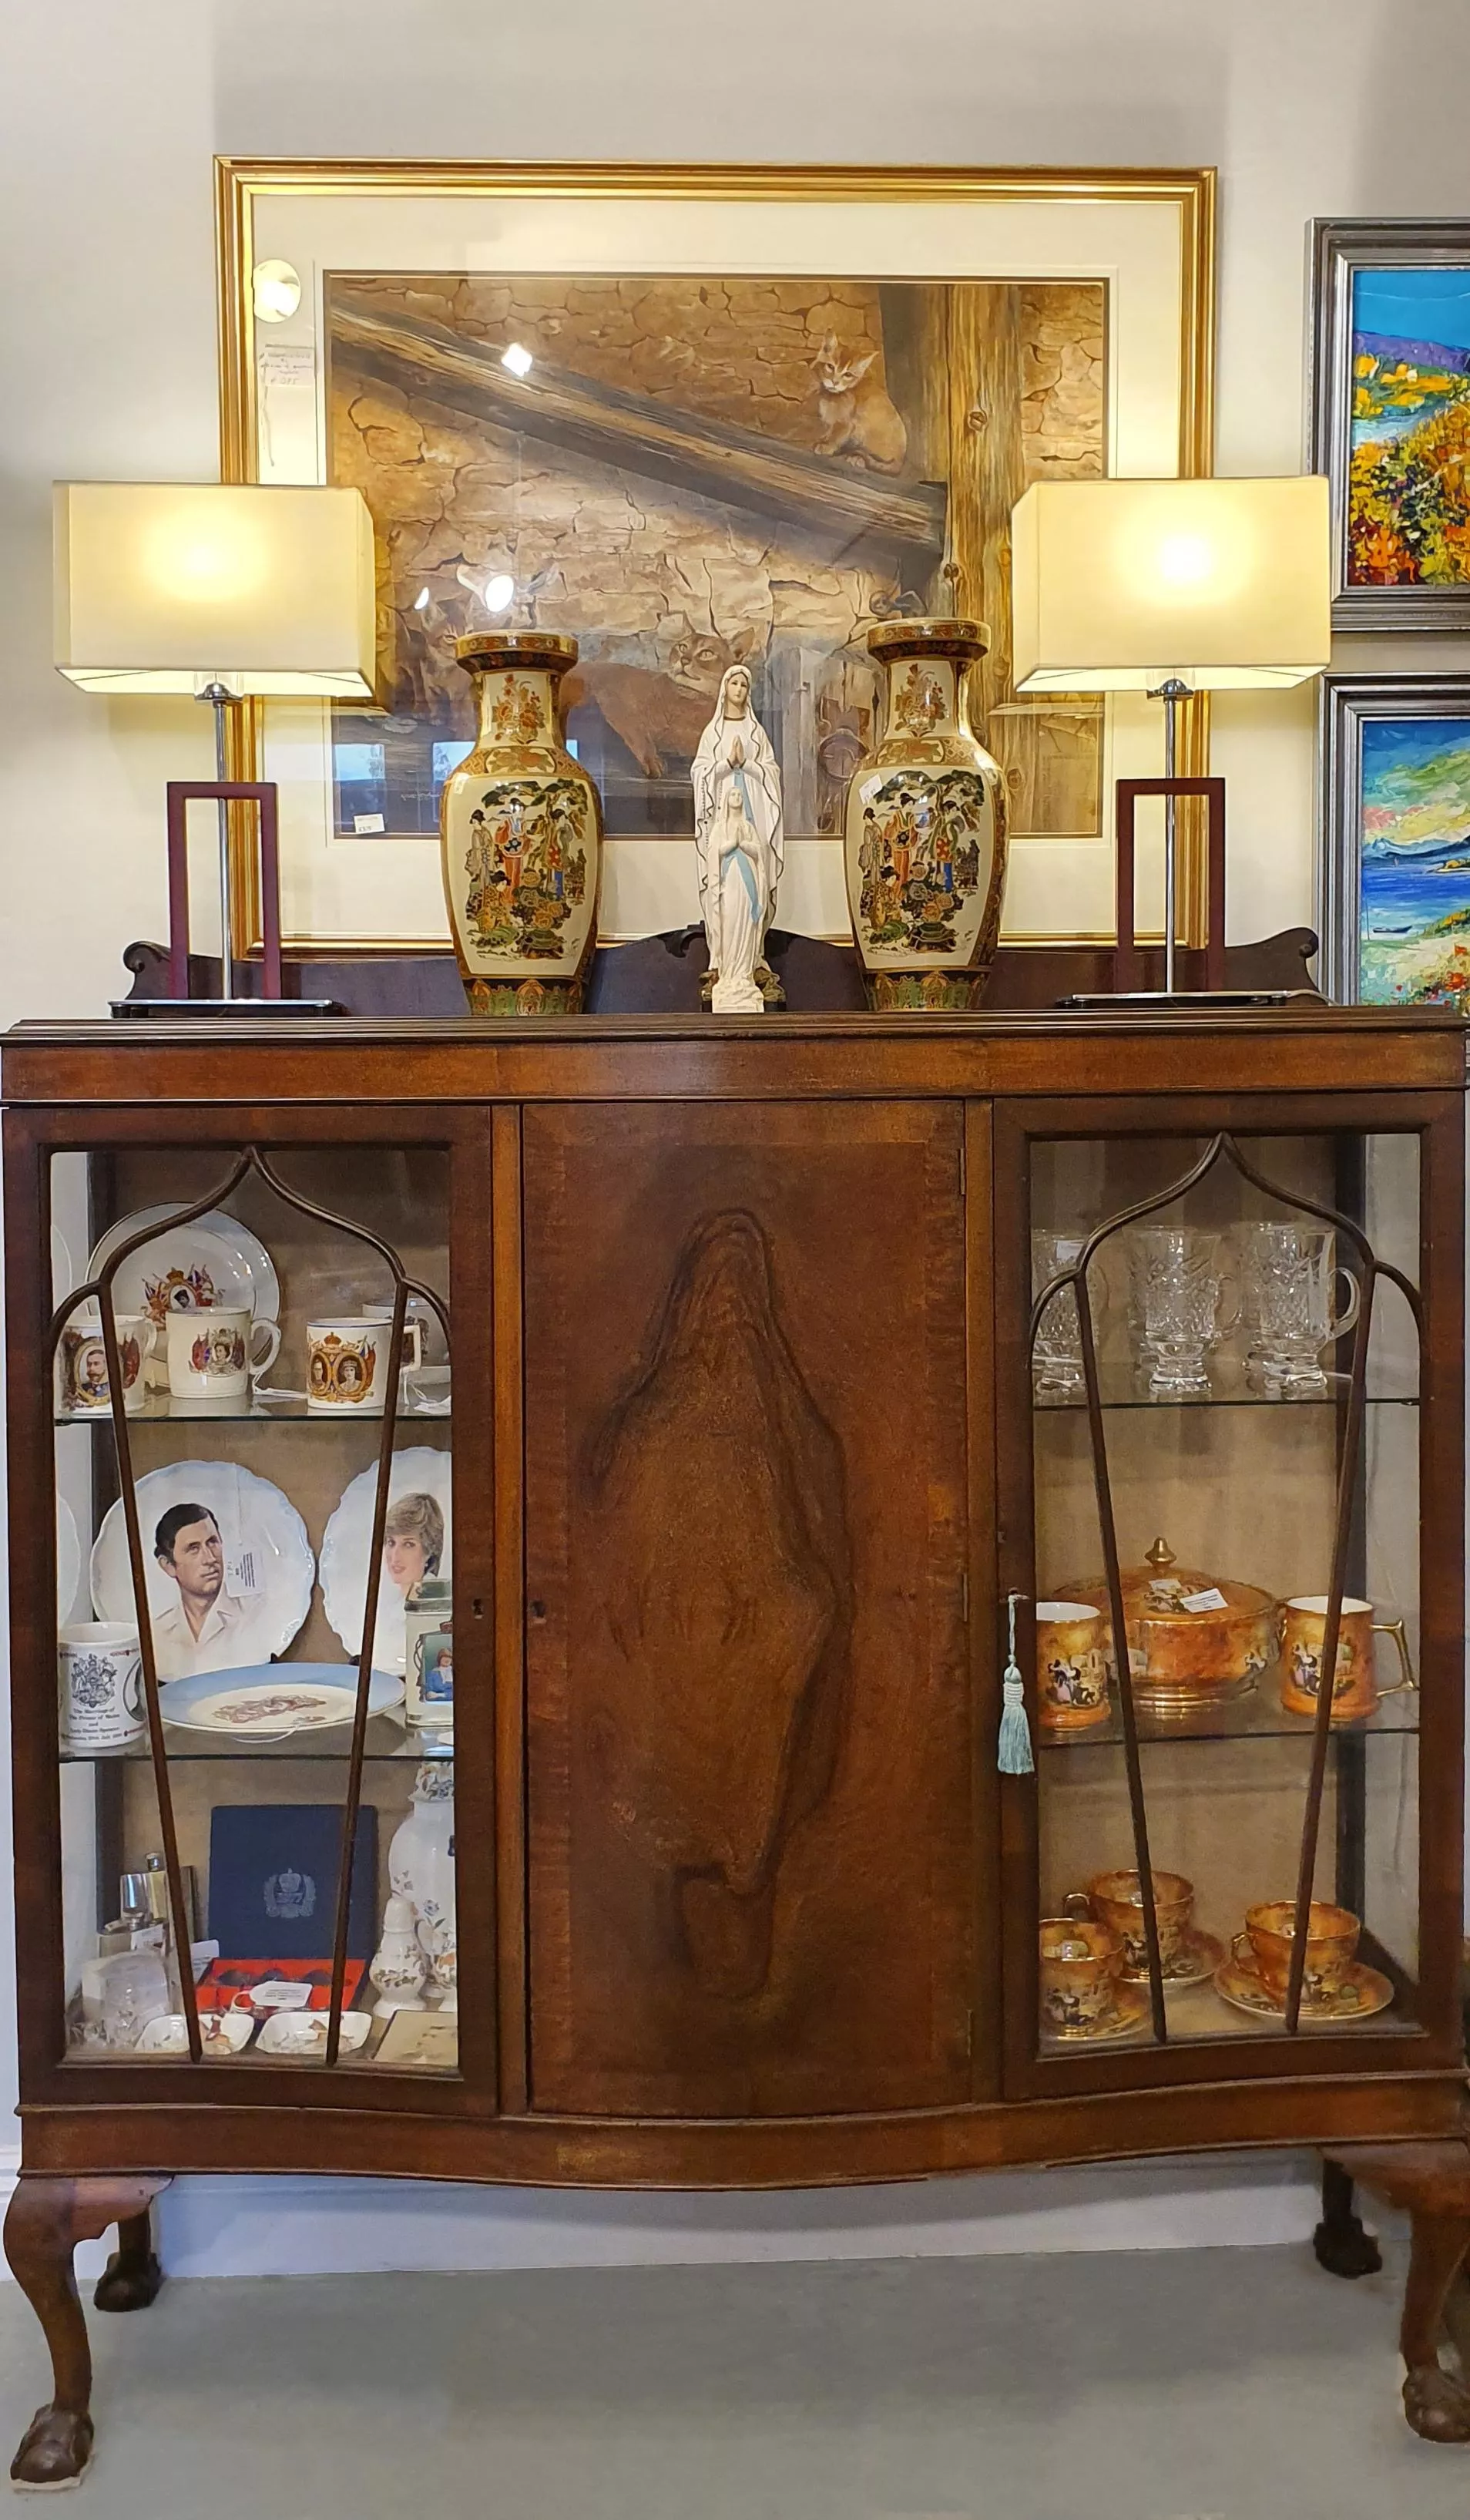 Wood you believe it ... Vintage mahogany cabinet making quite a stir in Tralee